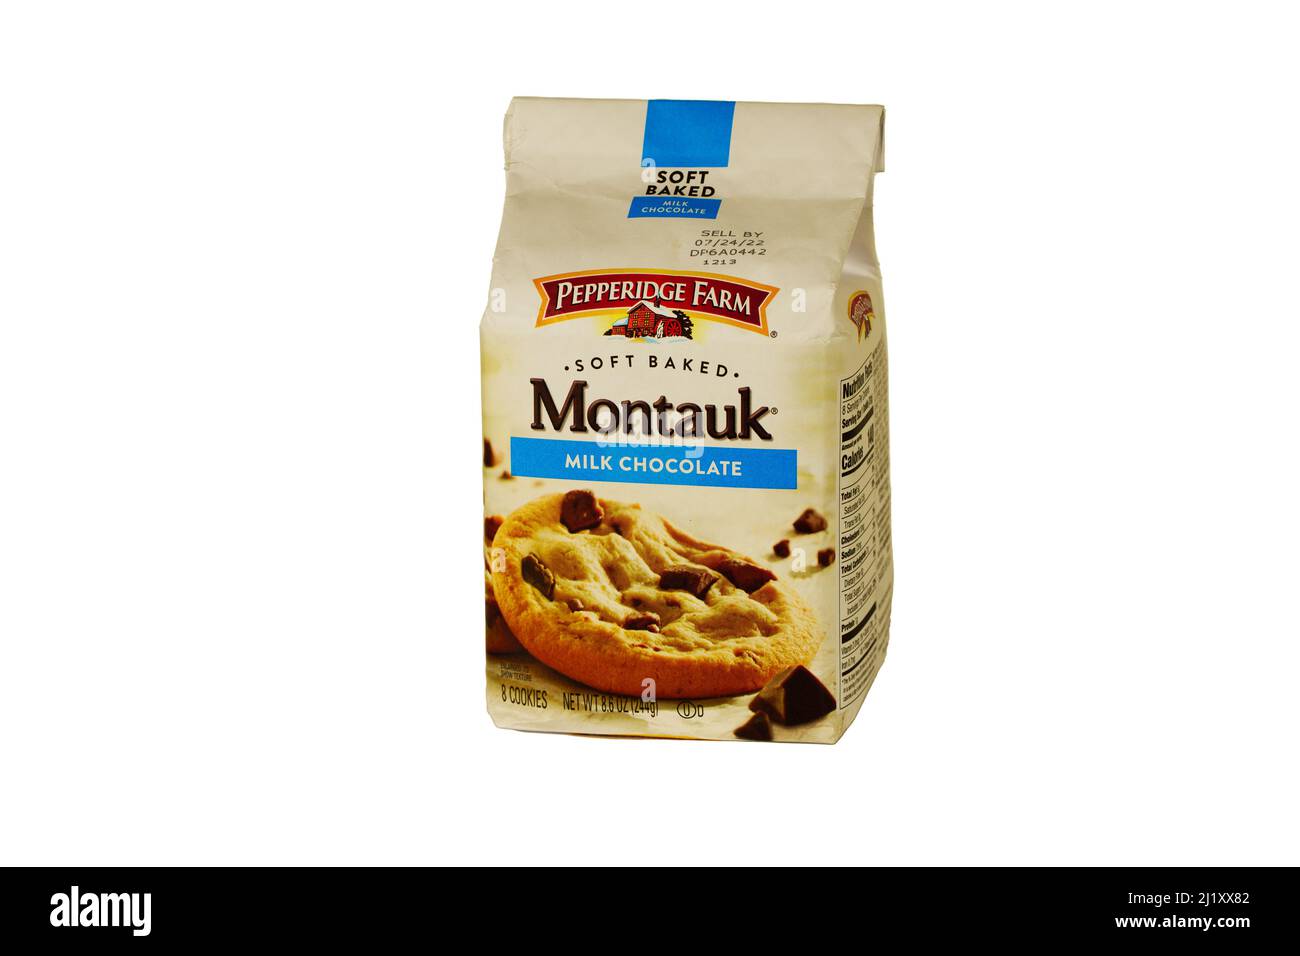 Lancaster, PA, USA - March 27, 2022: A bag of soft baked Pepperidge Farms Montauk Chocolate Chip Cookies. The familiar bag with the large cookies offe Stock Photo